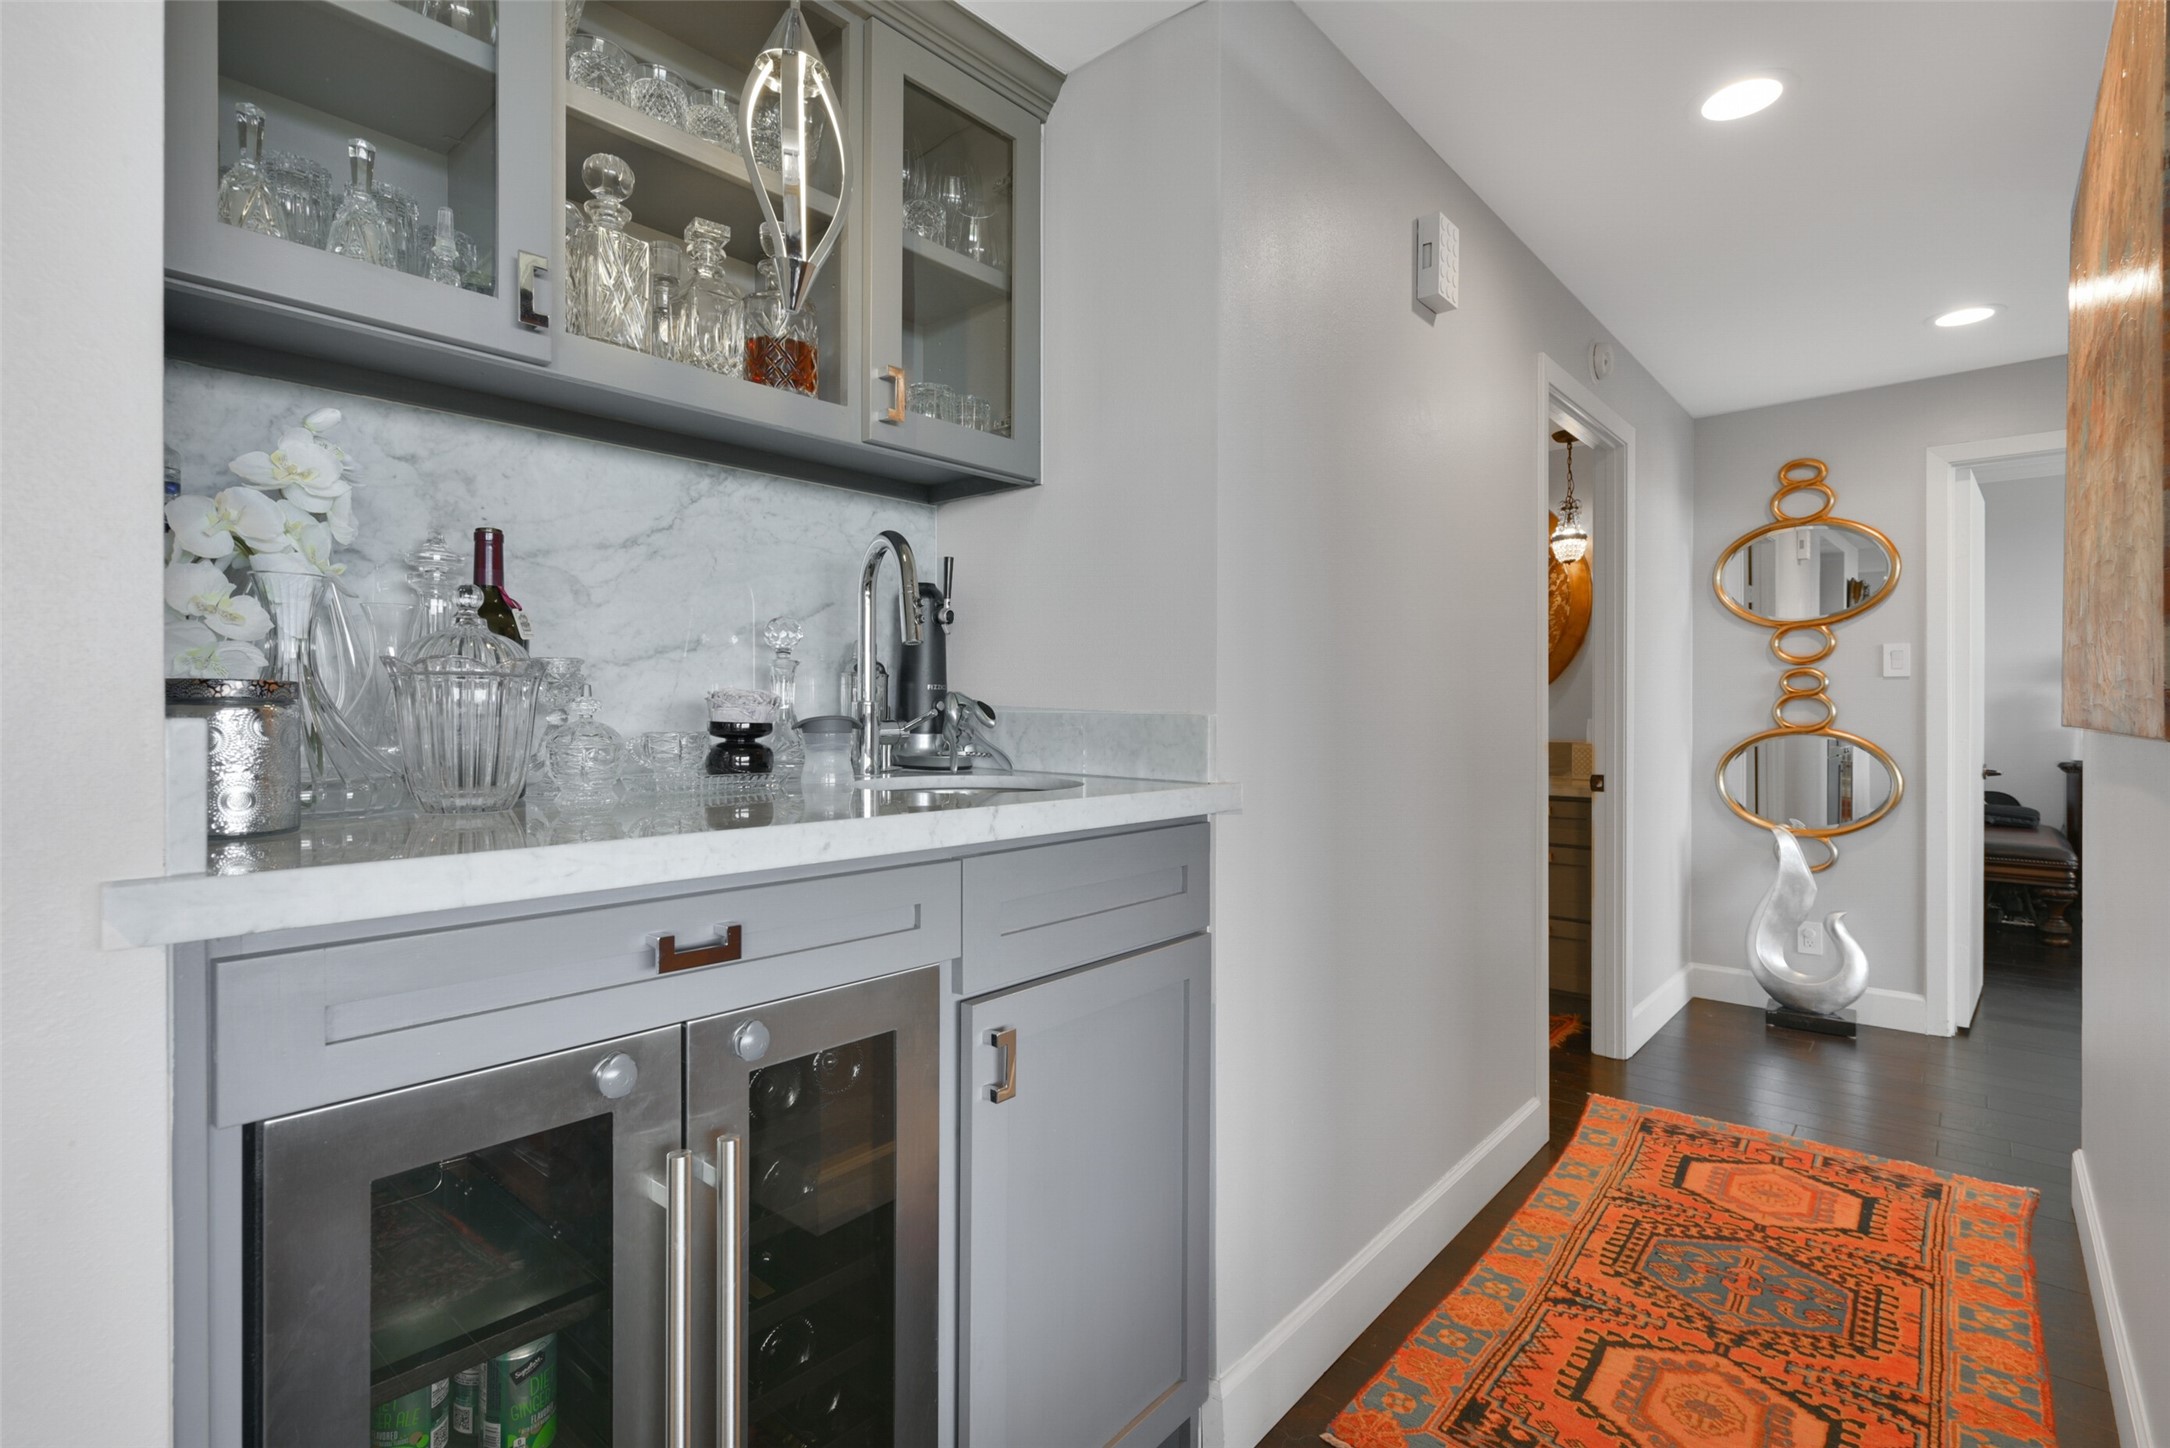 Elevate your entertaining with a chic wet bar with custom cabinets, marble countertop and backsplash, double wine fridge, glass front cabinets and an elegant pendant fixture.